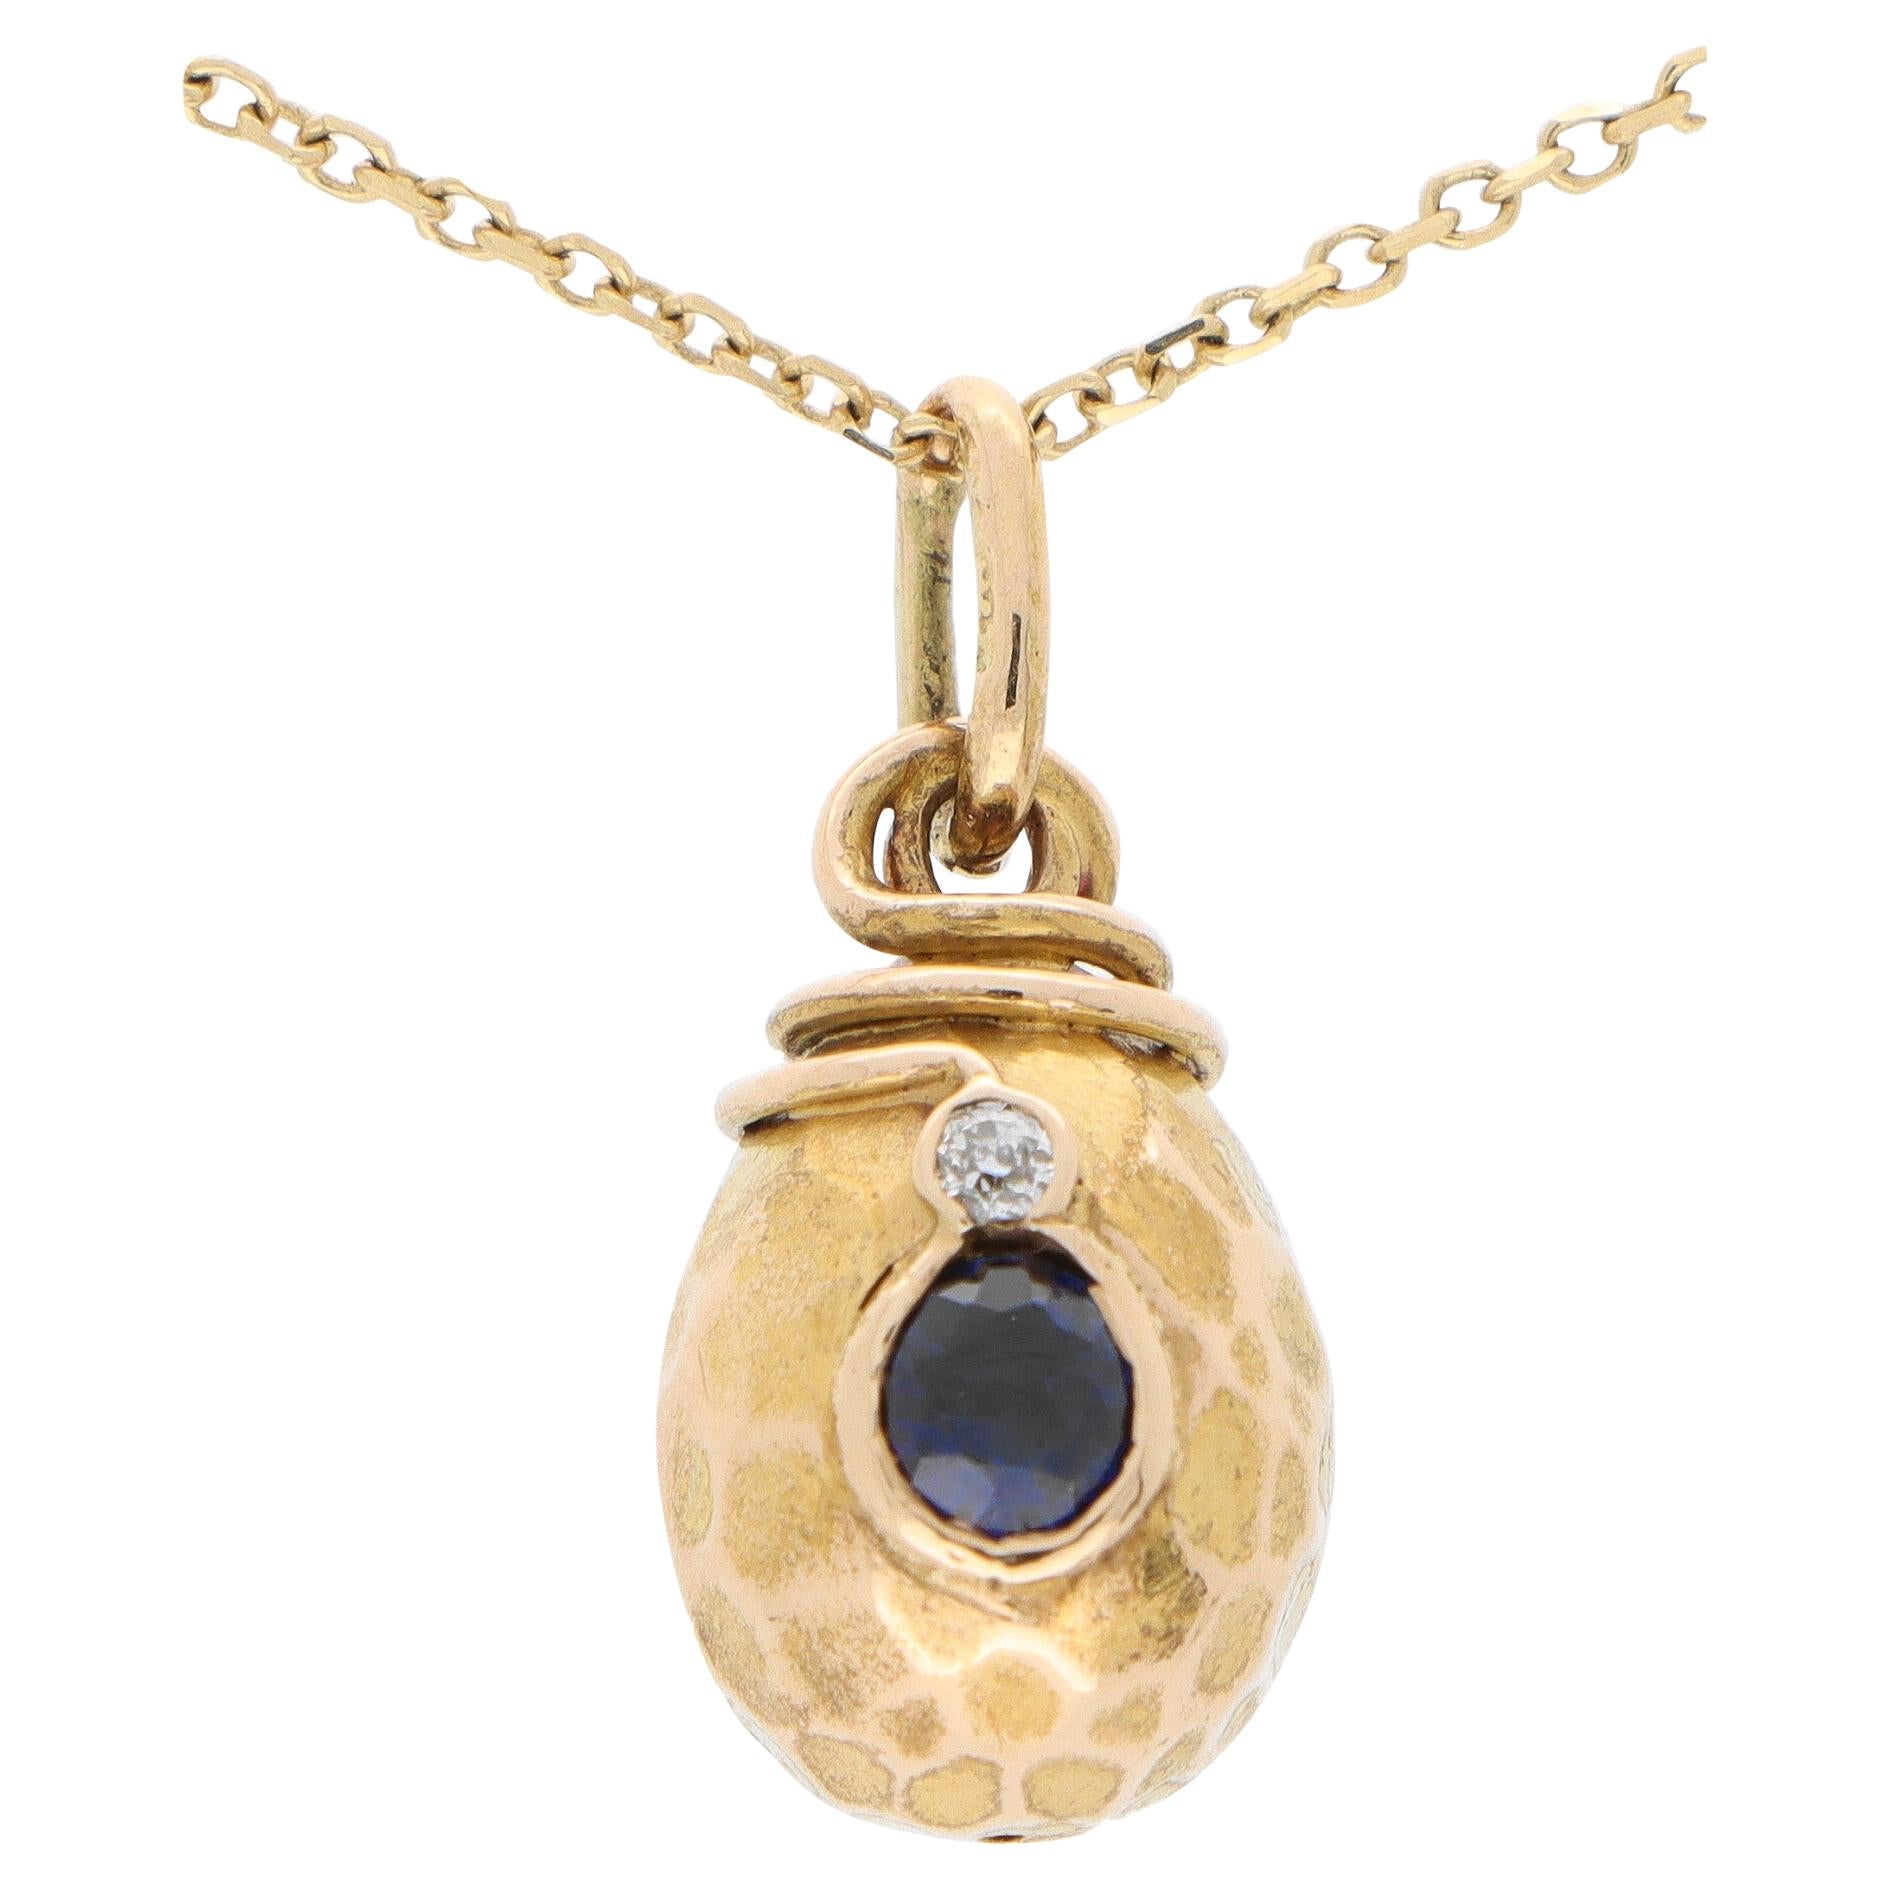 Vintage Russian Sapphire and Diamond Egg Pendant Charm in 14k Yellow Gold